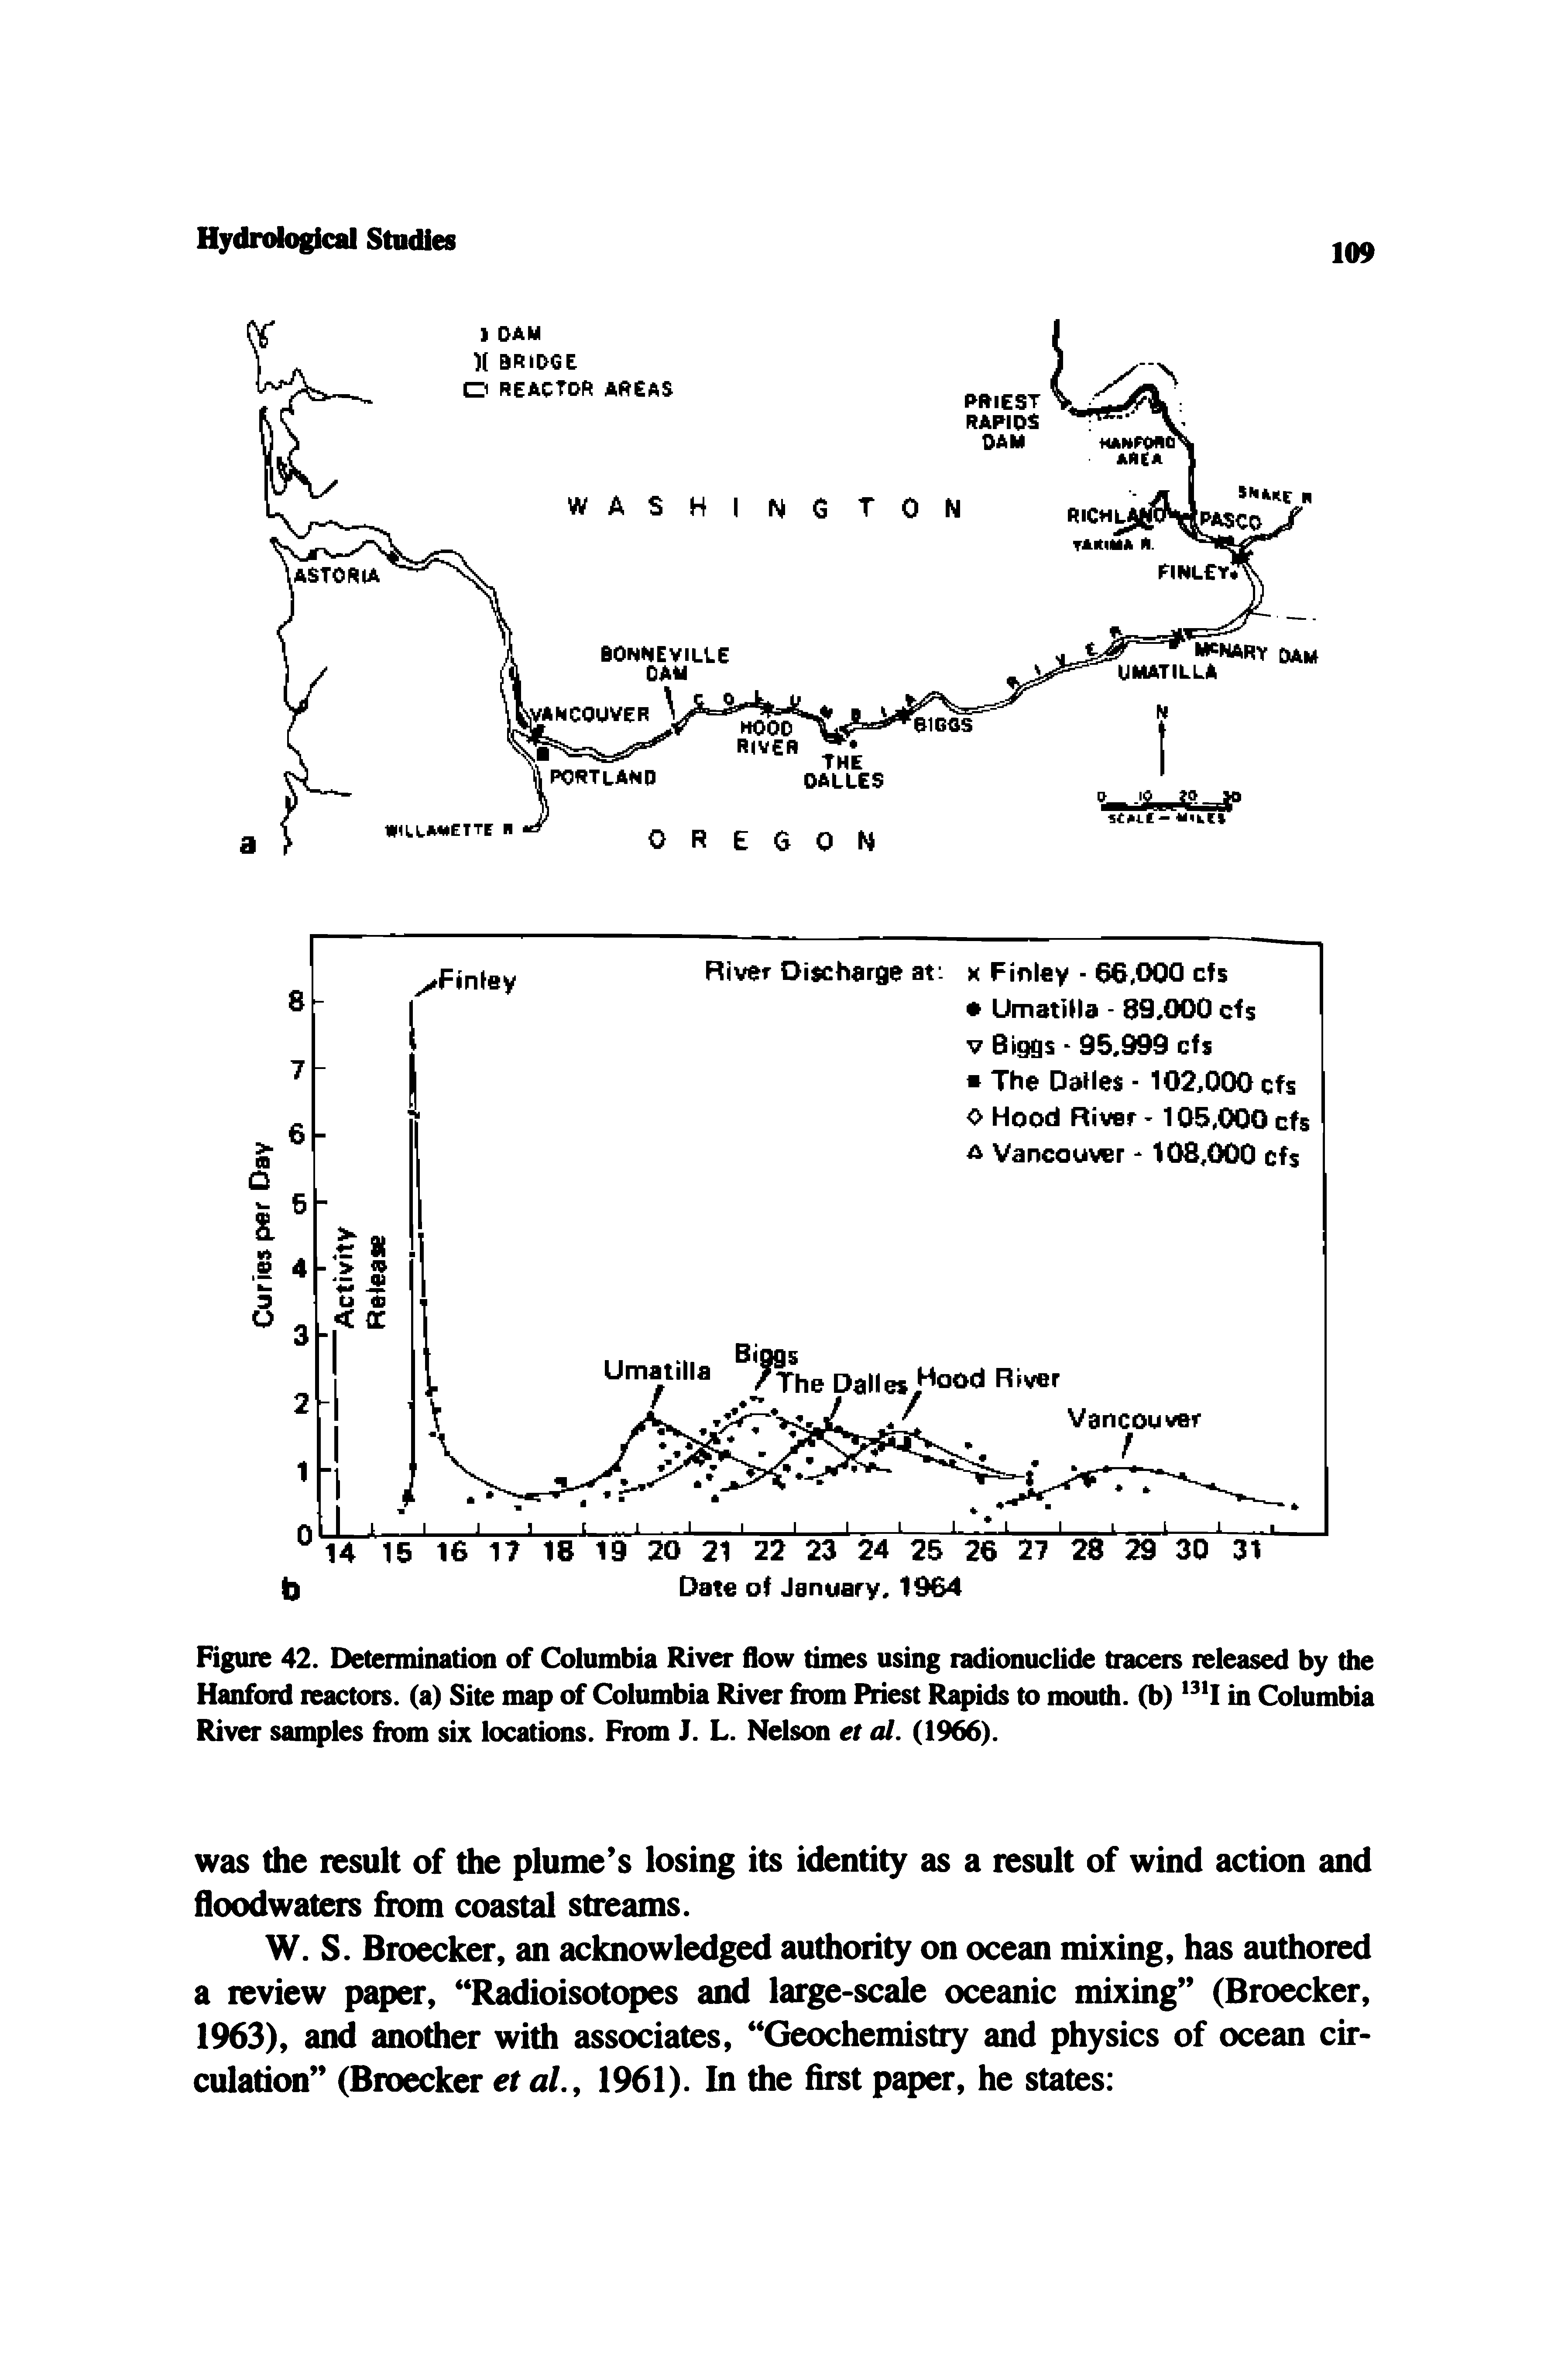 Figure 42. Detenniiiation of Columbia River flow tunes using radionuclide tracers released by the Hanford reactors, (a) Site map of Columbia River from Priest Rapids to mouth, (b) in Columbia River samples from six locations. From J. L. Nelson et al. (1966).